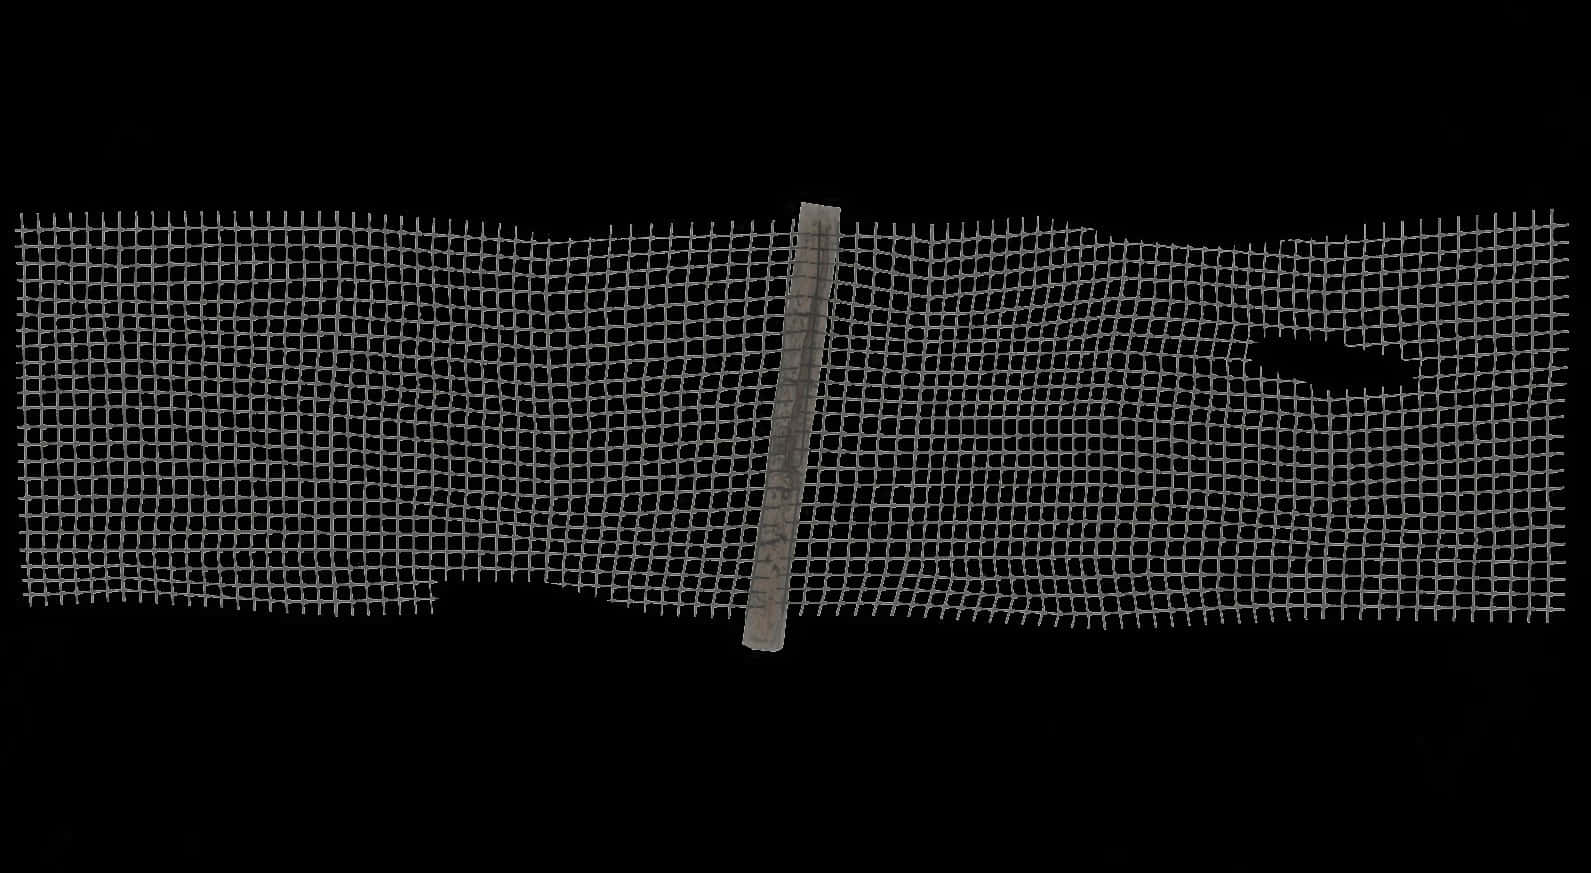 A Wire Mesh With A Metal Bar